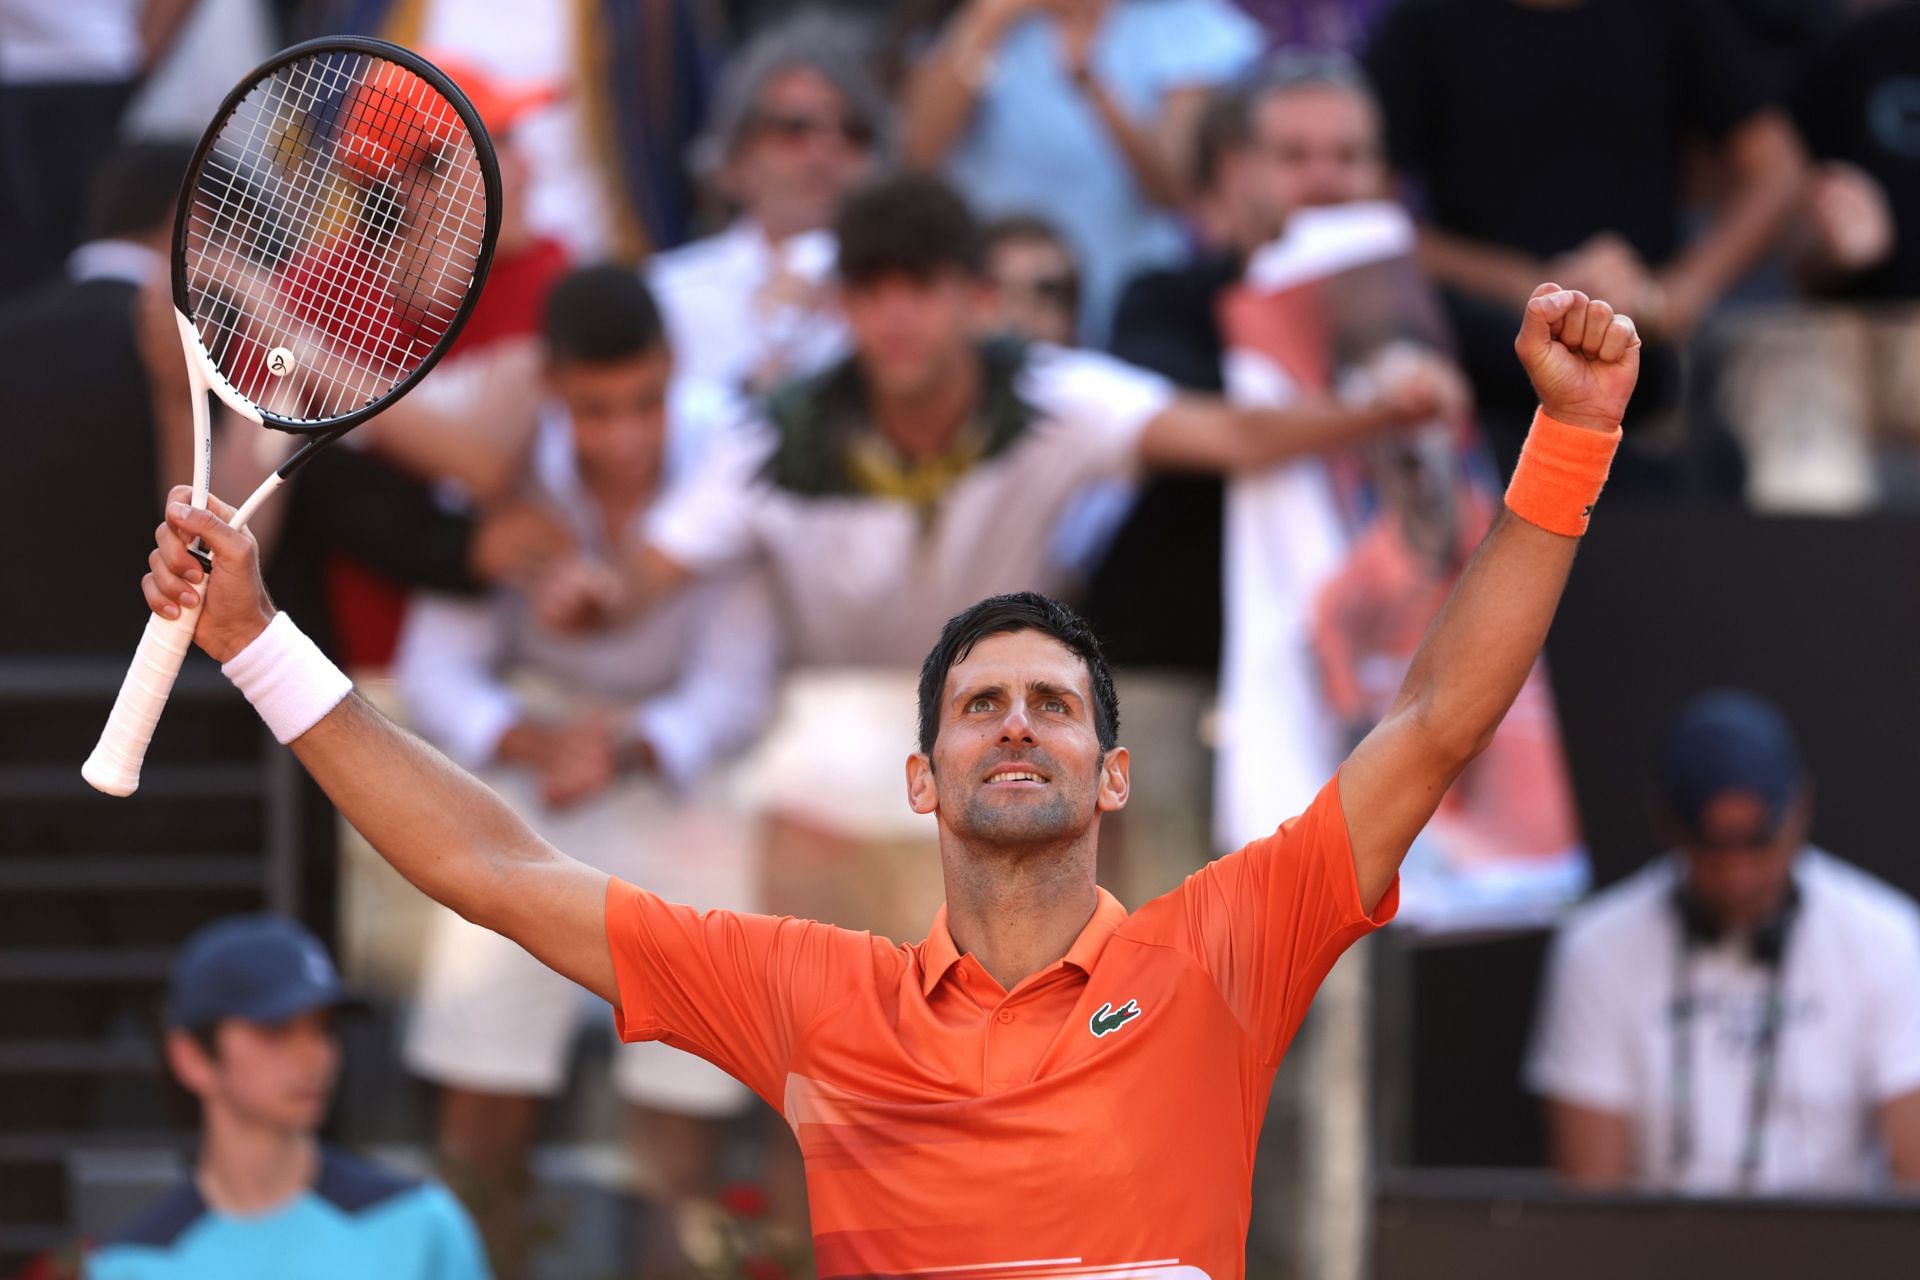 Novak Djokovic at the Italian Open - photo by Alex Pantling/Getty Images